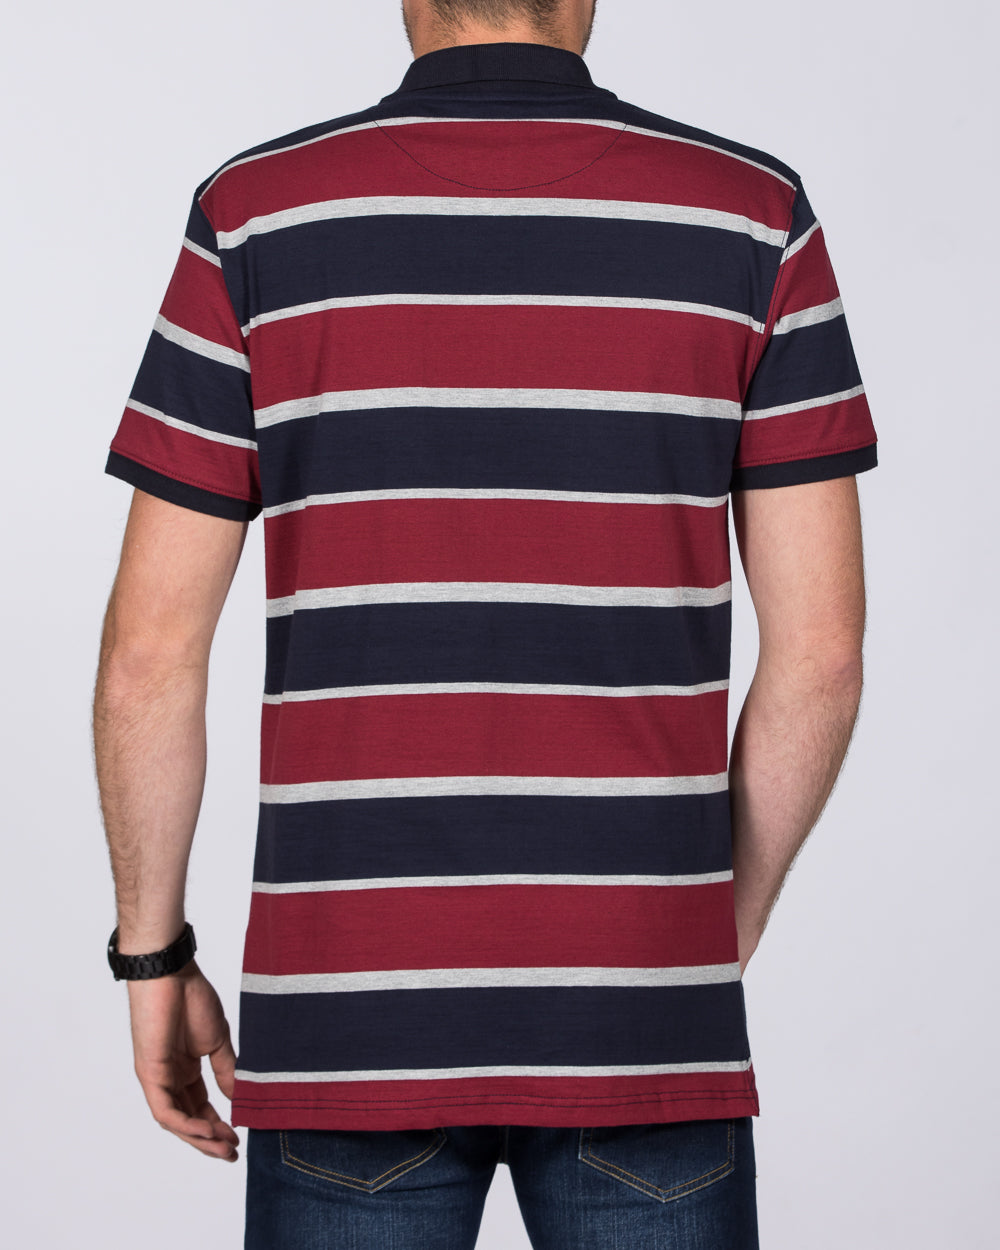 2t Regular Fit Tall Rugby Striped Polo Shirt (burgundy)